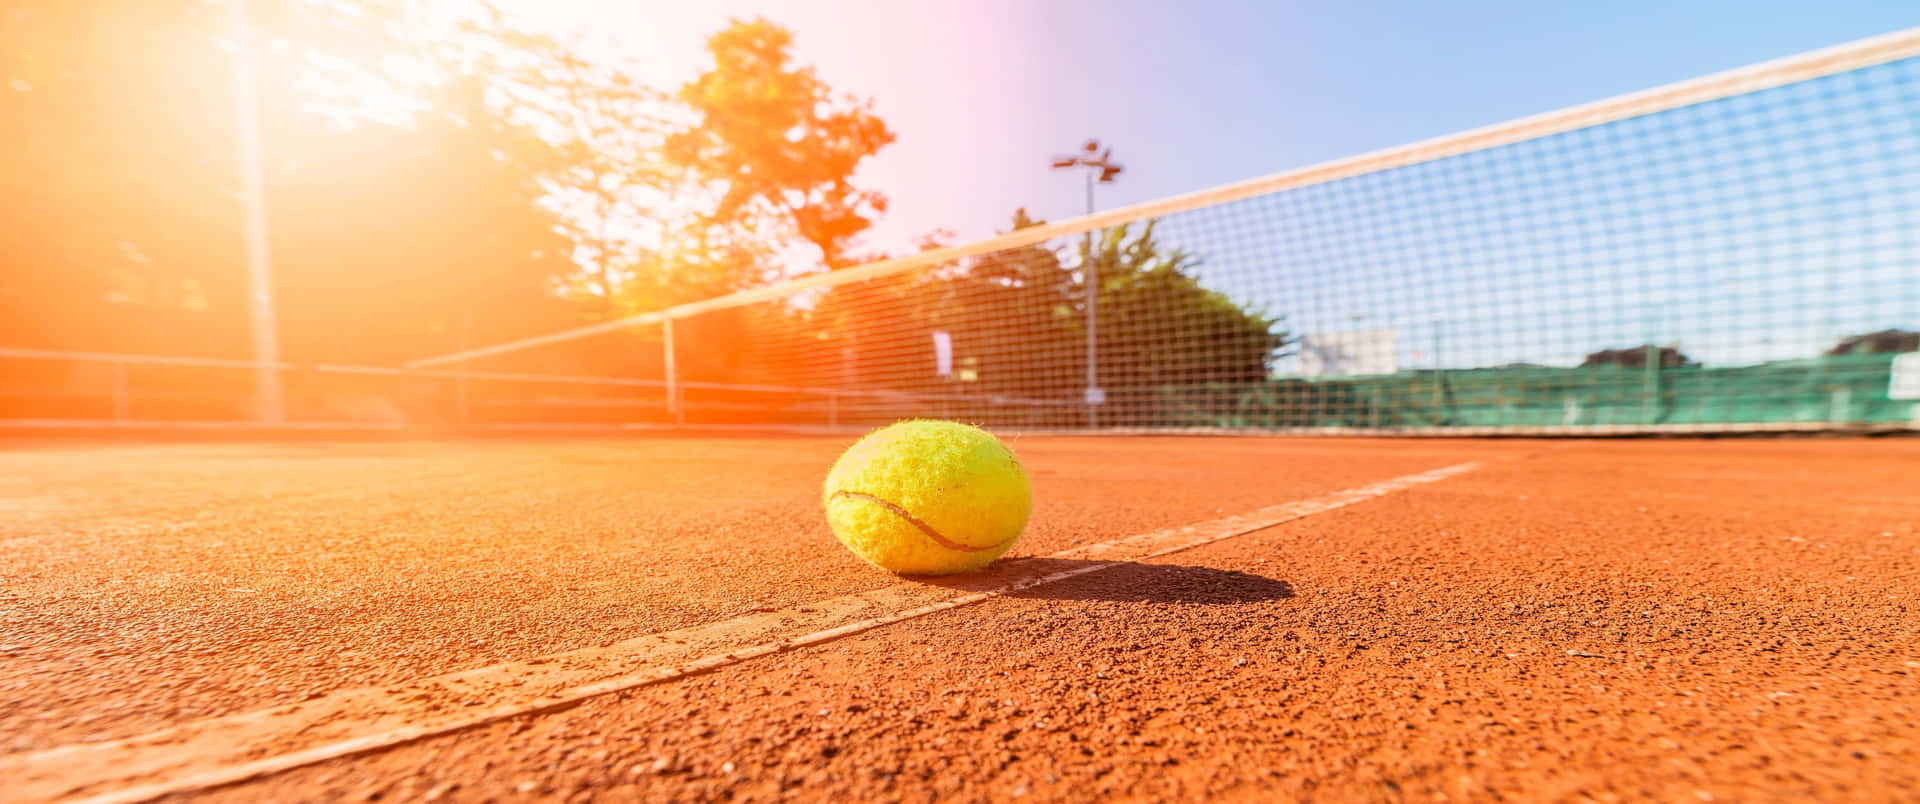 Tennis Ball On The Court In The Sun